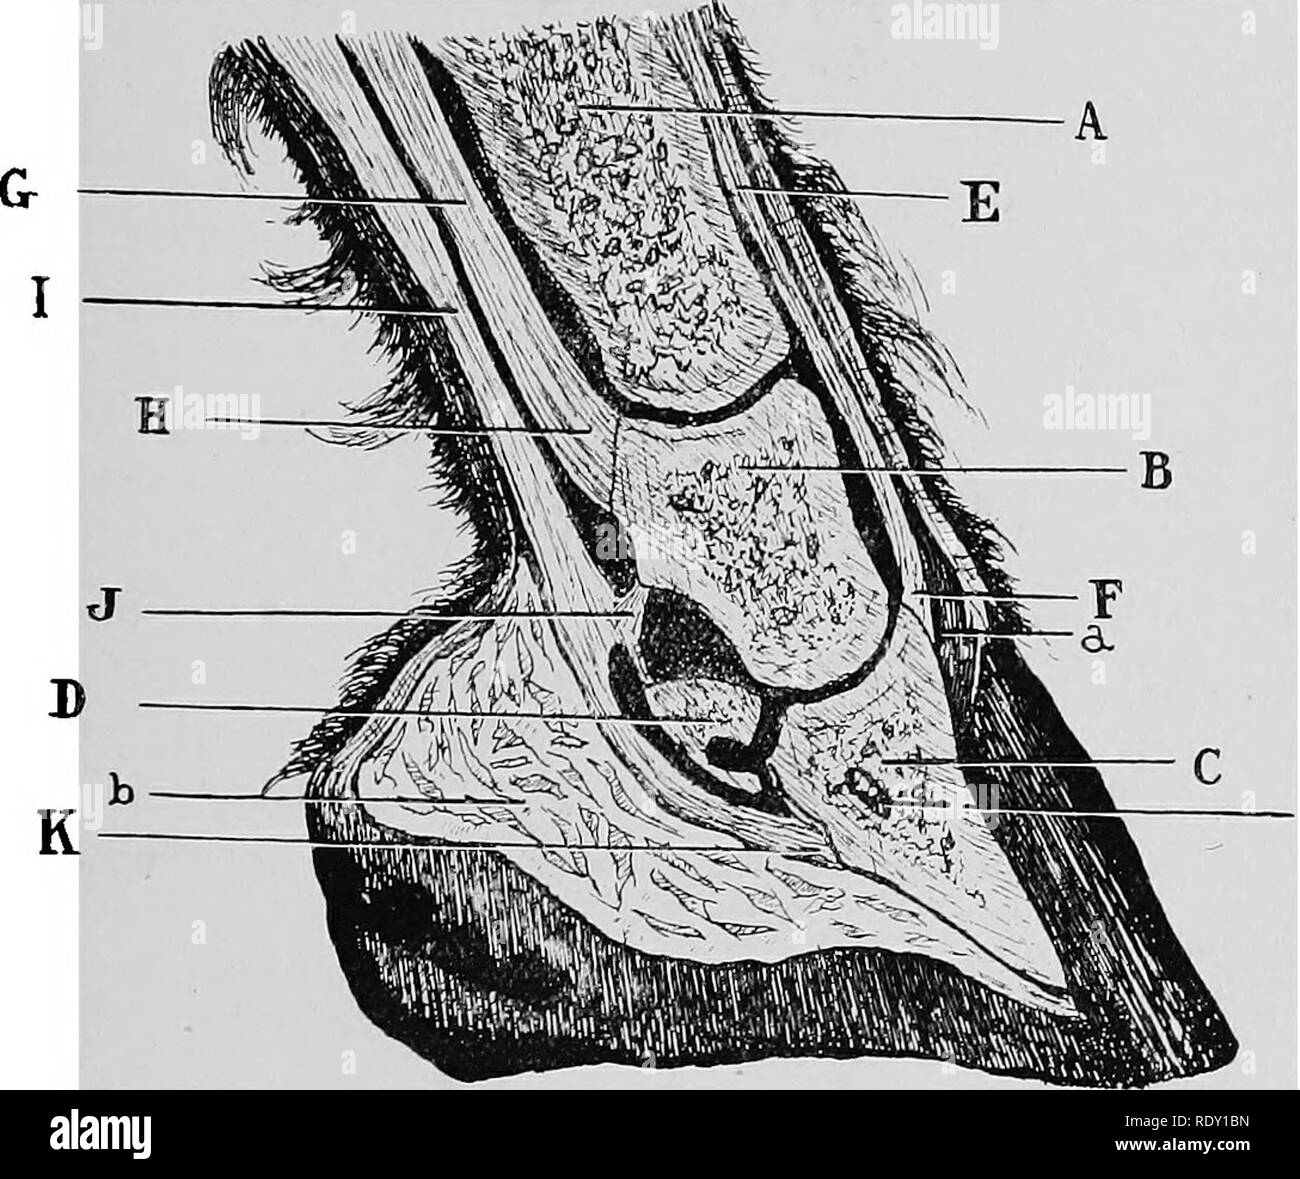 . Diseases of the horse's foot . Hoofs; Horses. EEGIONAL ANATOMY 21 Action.—This muscle flexes the second phalanx on the first, the first on the metacarpus, and the entire foot on the forearm. Mechanically, it acts as a stay when the animal IS standing by maintaining the metacarpo-phalangeal angle. The Flexor Pedis Peepoeans, oe the Deep Flexoe op THE Phalanges.—This muscle consists of three easily- divided portions : an ulnar, a humeral, and a radial, and has. Fig. 13.—Median Section of Foot. A, Os suffraginis ; B, os coronae ; C, os pedis : B, navicular bone; JE, tendon of the extensor pedis Stock Photo